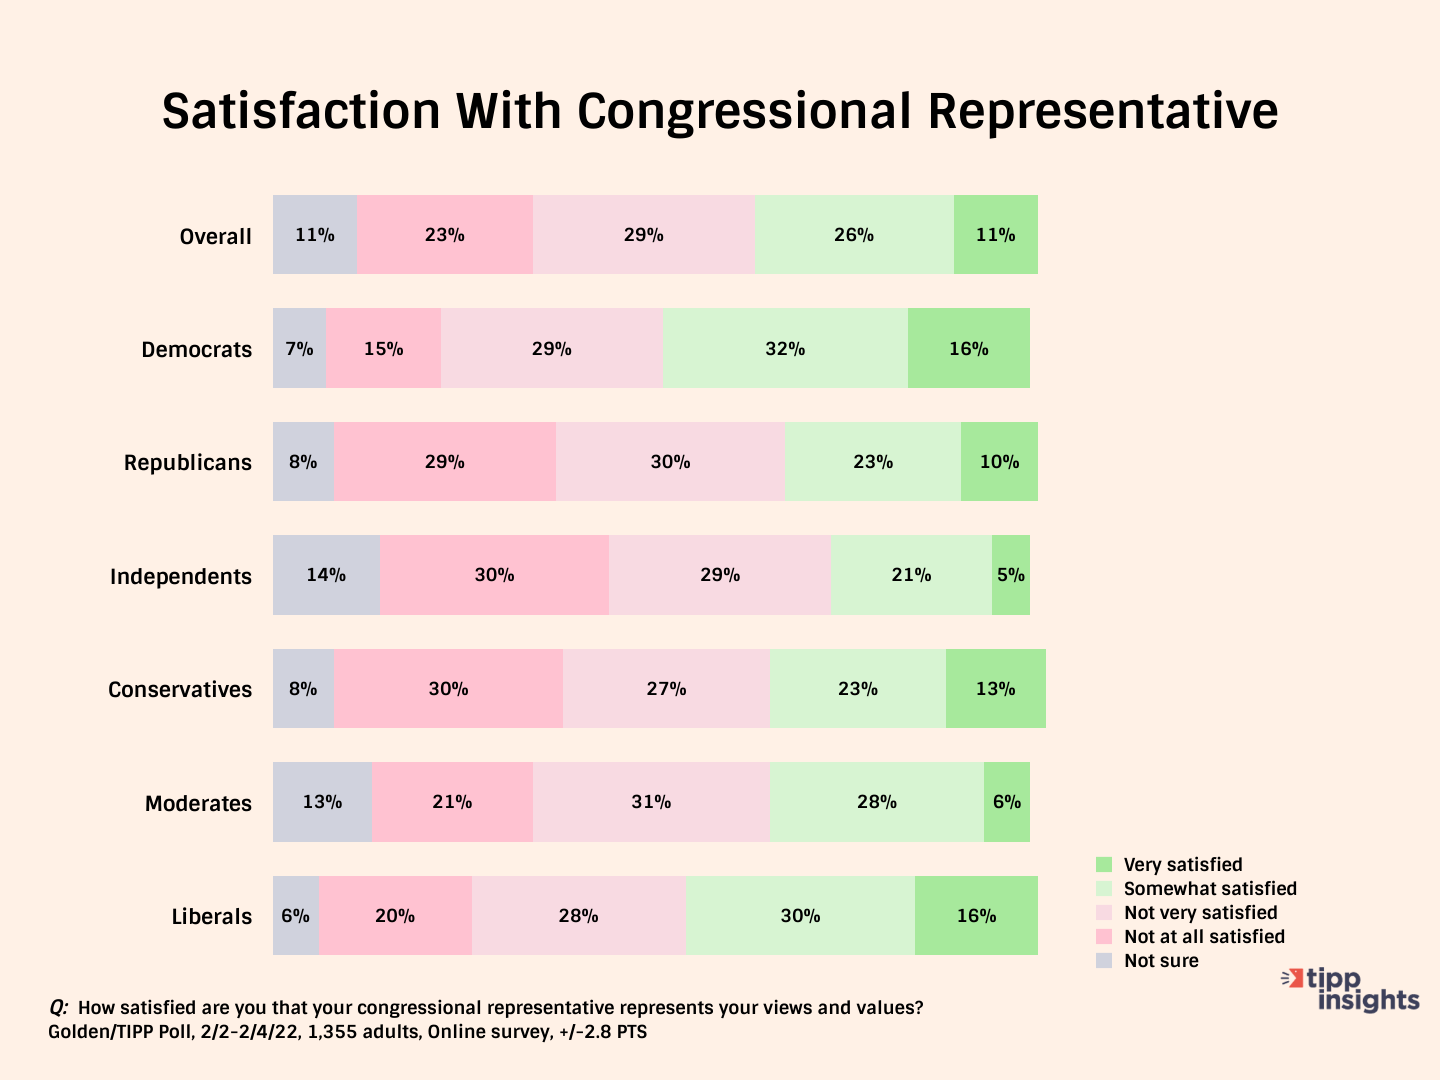 Golden/TIPP Poll Results: How satisfied are Amerians with their congressional representatives?